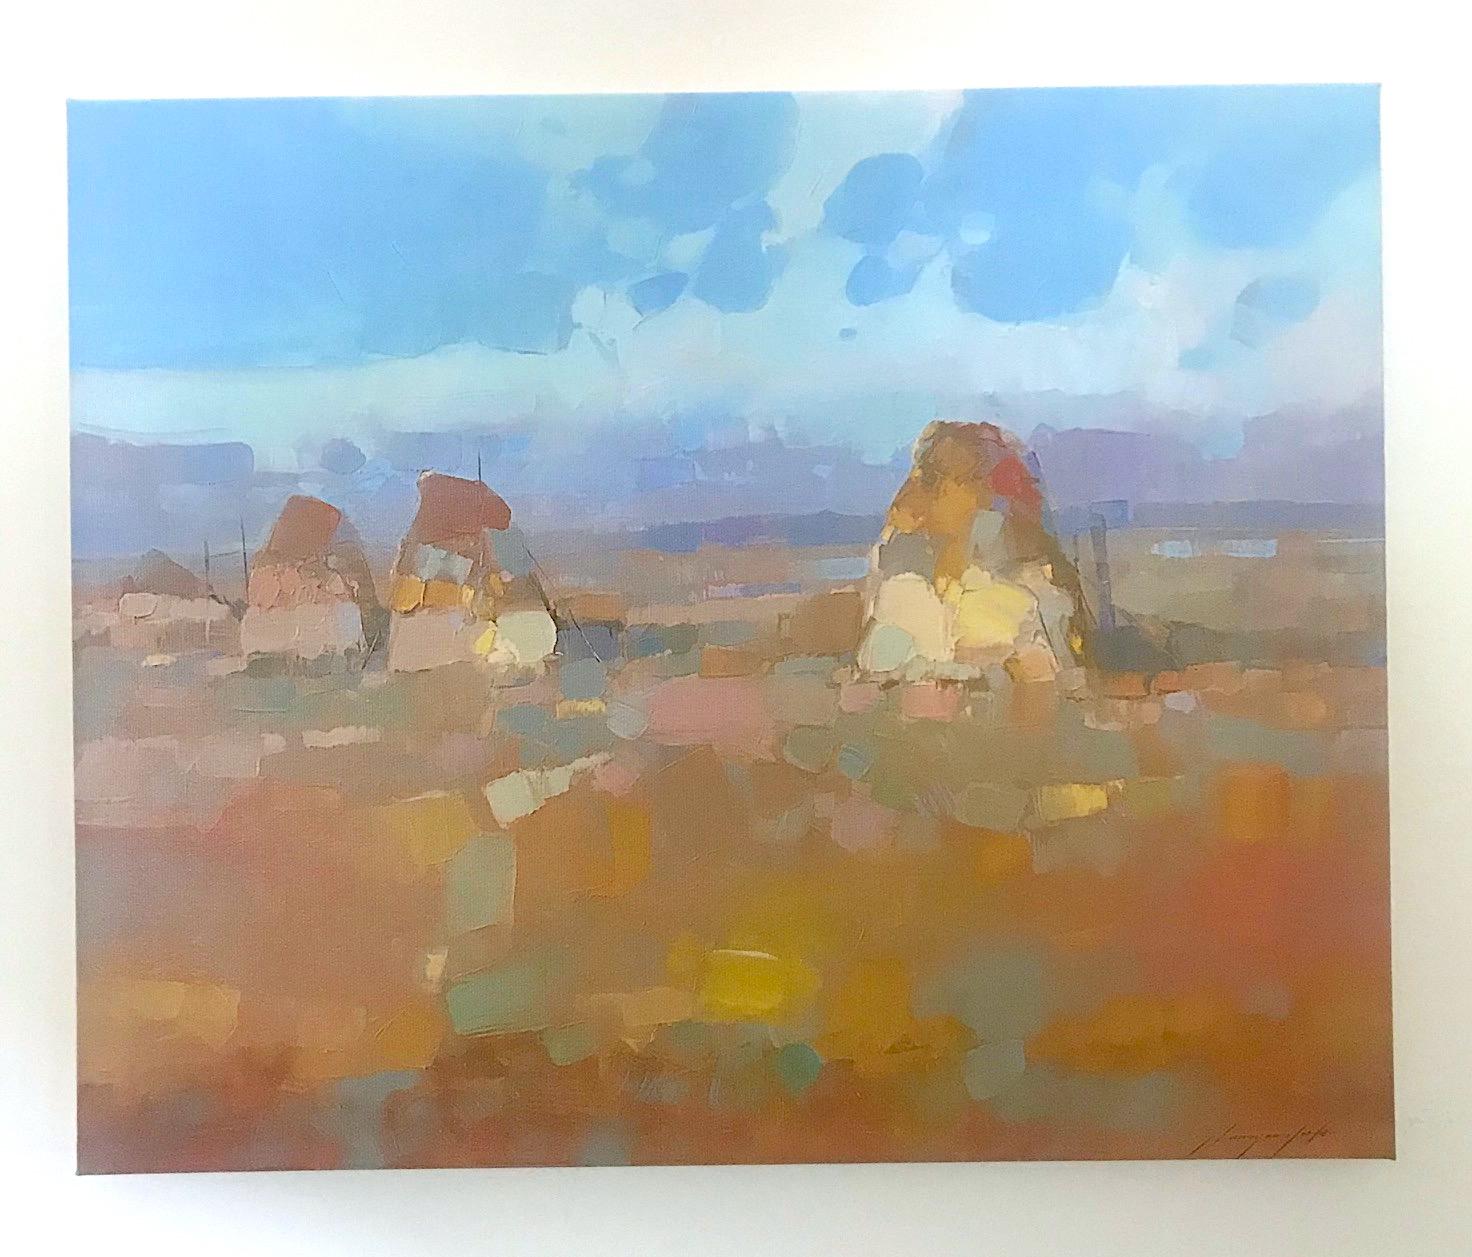 Stacks, Print on Canvas - Brown Landscape Painting by Vahe Yeremyan